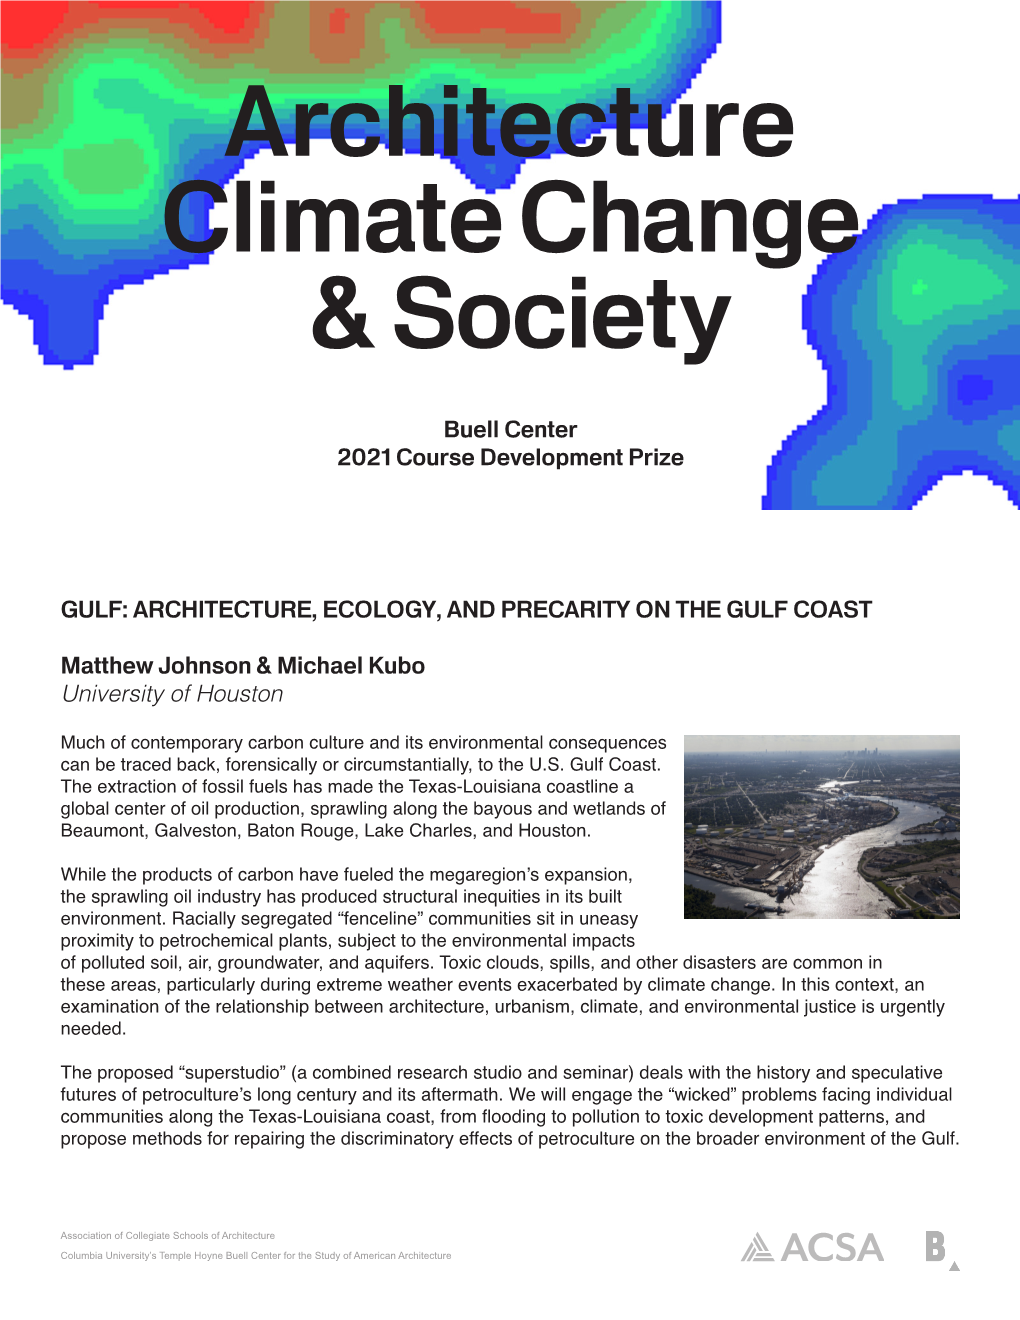 Architecture Climate Change & Society